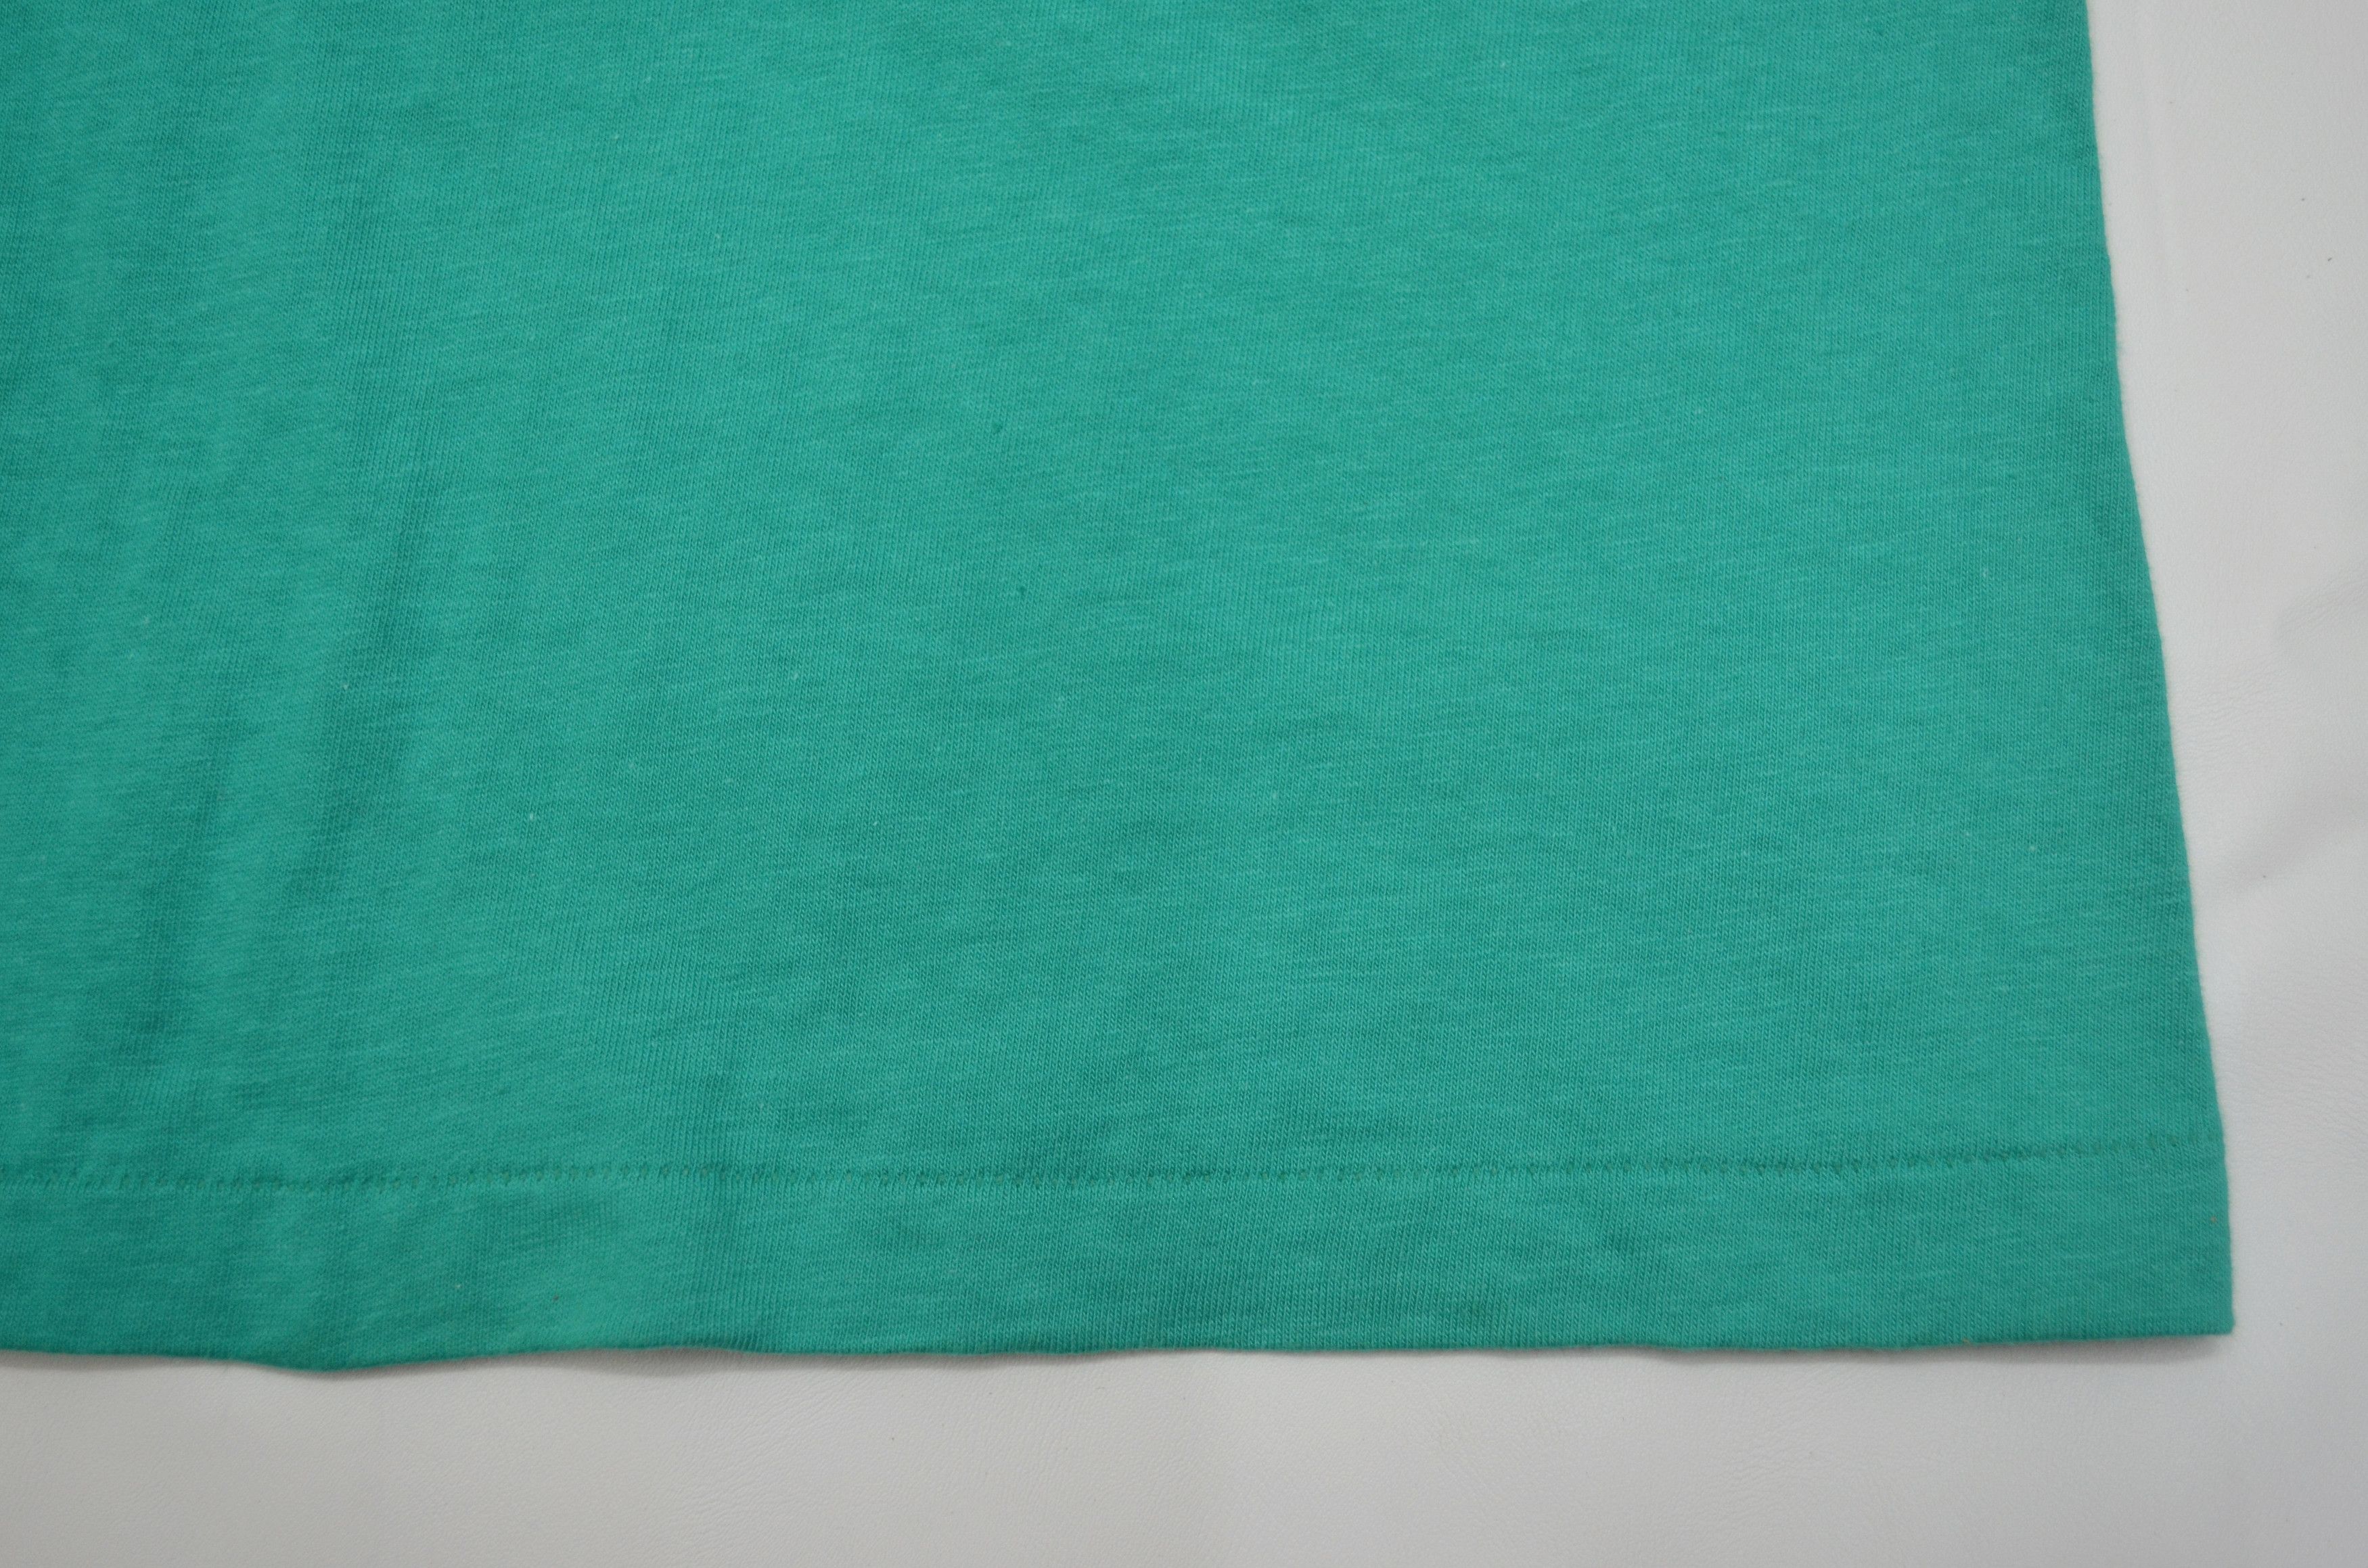 Vintage 90s JCPenney Royal Comfort Blank Pocket Tee Made In USA Size US L / EU 52-54 / 3 - 4 Thumbnail